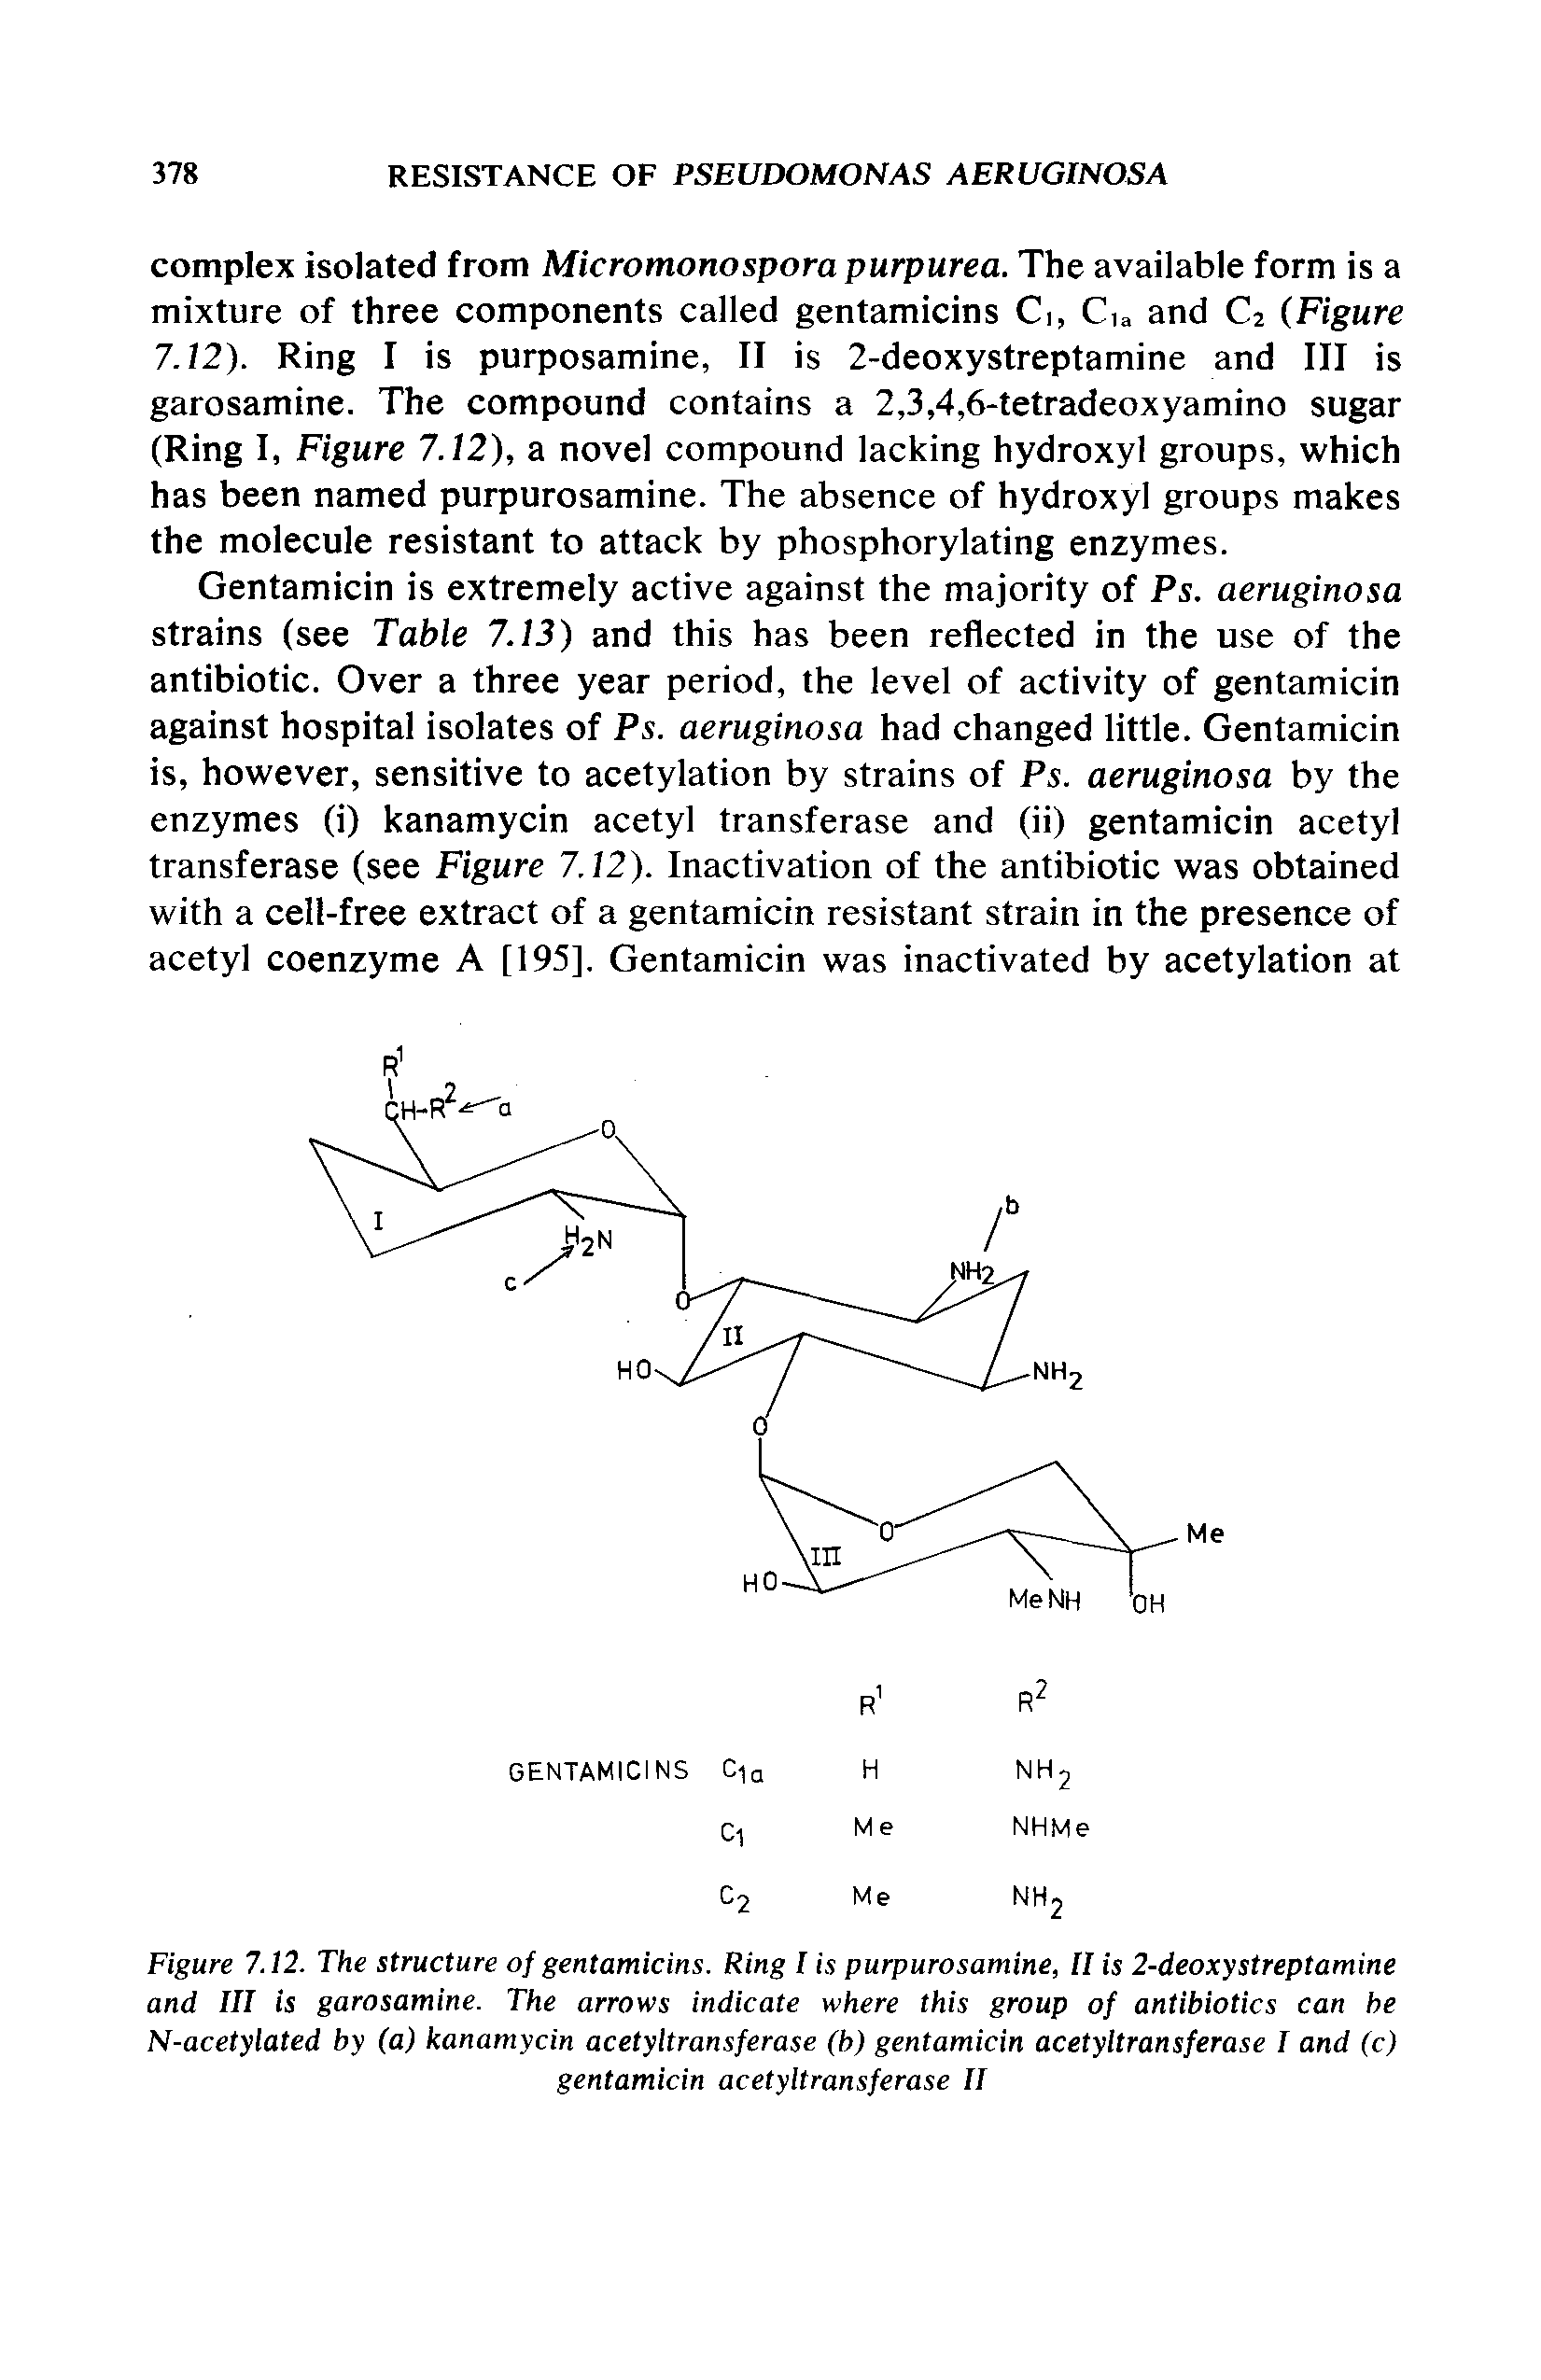 Figure 7.12. The structure of gentamicins. Ring I is purpurosamine, [I is 2-deoxystreptamine and III is garosamine. The arrows indicate where this group of antibiotics can he N-acetylated by (a) kanamycin acetyltransferase (b) gentamicin acetyltransferase I and (c) gentamicin acetyltransferase II...